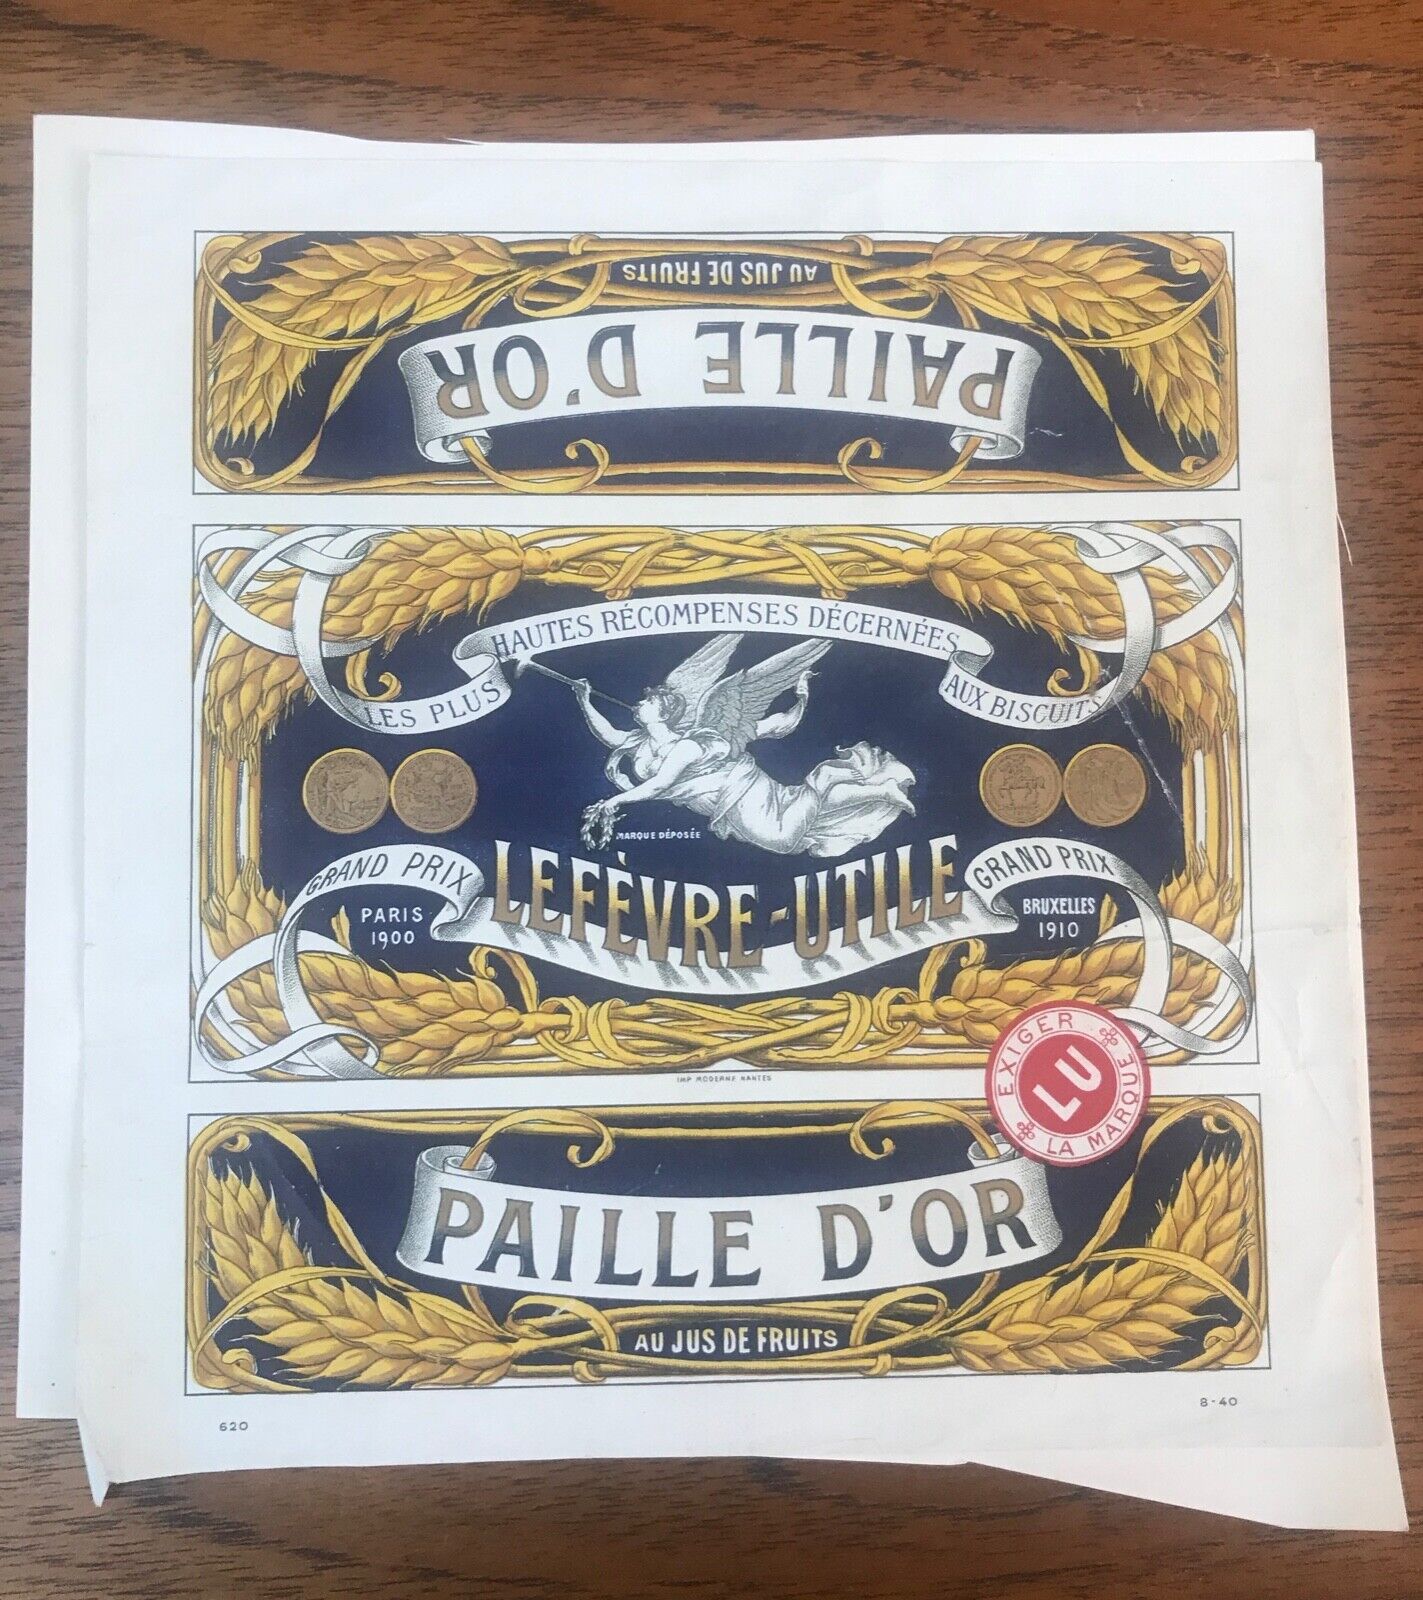 Advertising Lefèvre-utile Paille Gold to The 1913